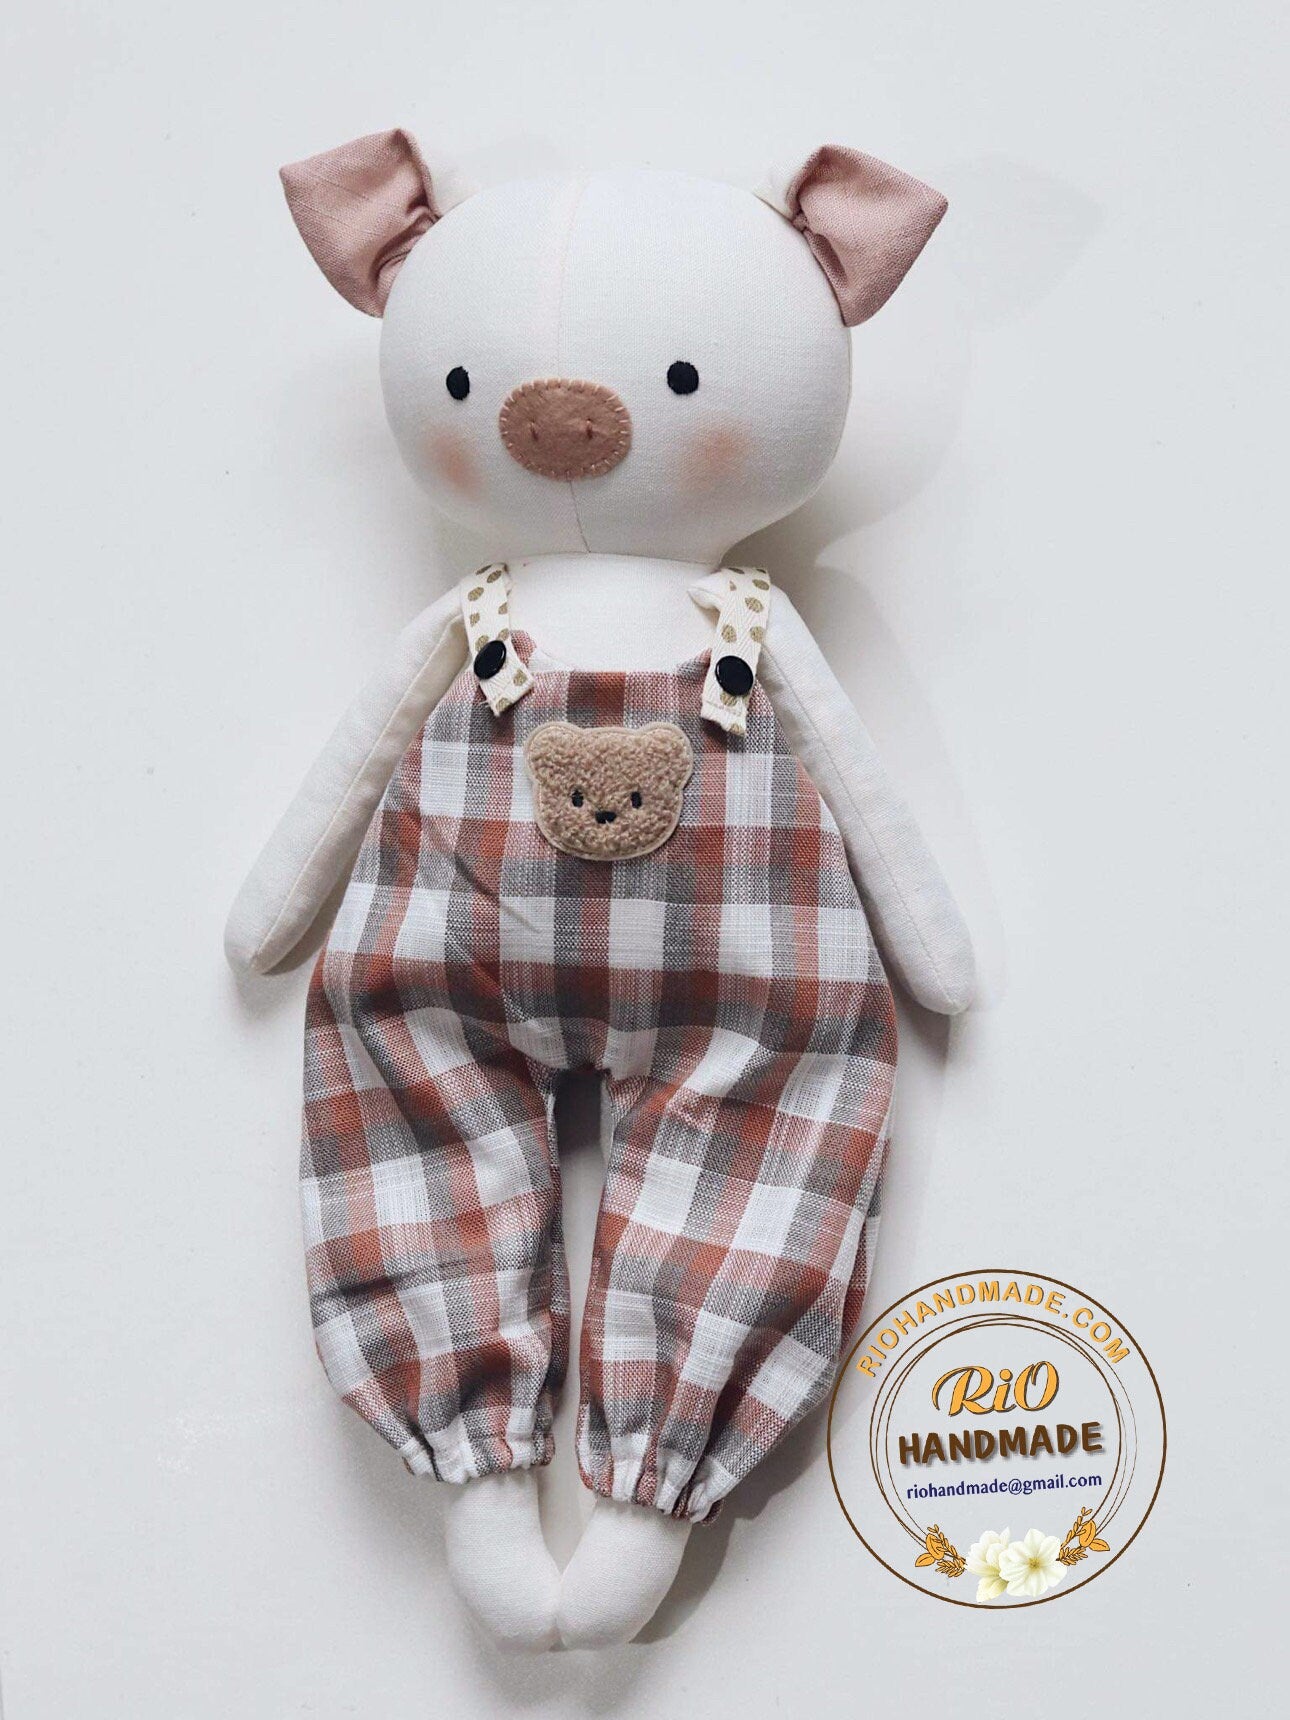 Ready To Ship, Rio Handmade Linen Piggy Toy, Nursery Decor Stuffed, Linen Baby Toy, Soft Stuffed Pig Toy For Toddler, Kid, Adult Hobby